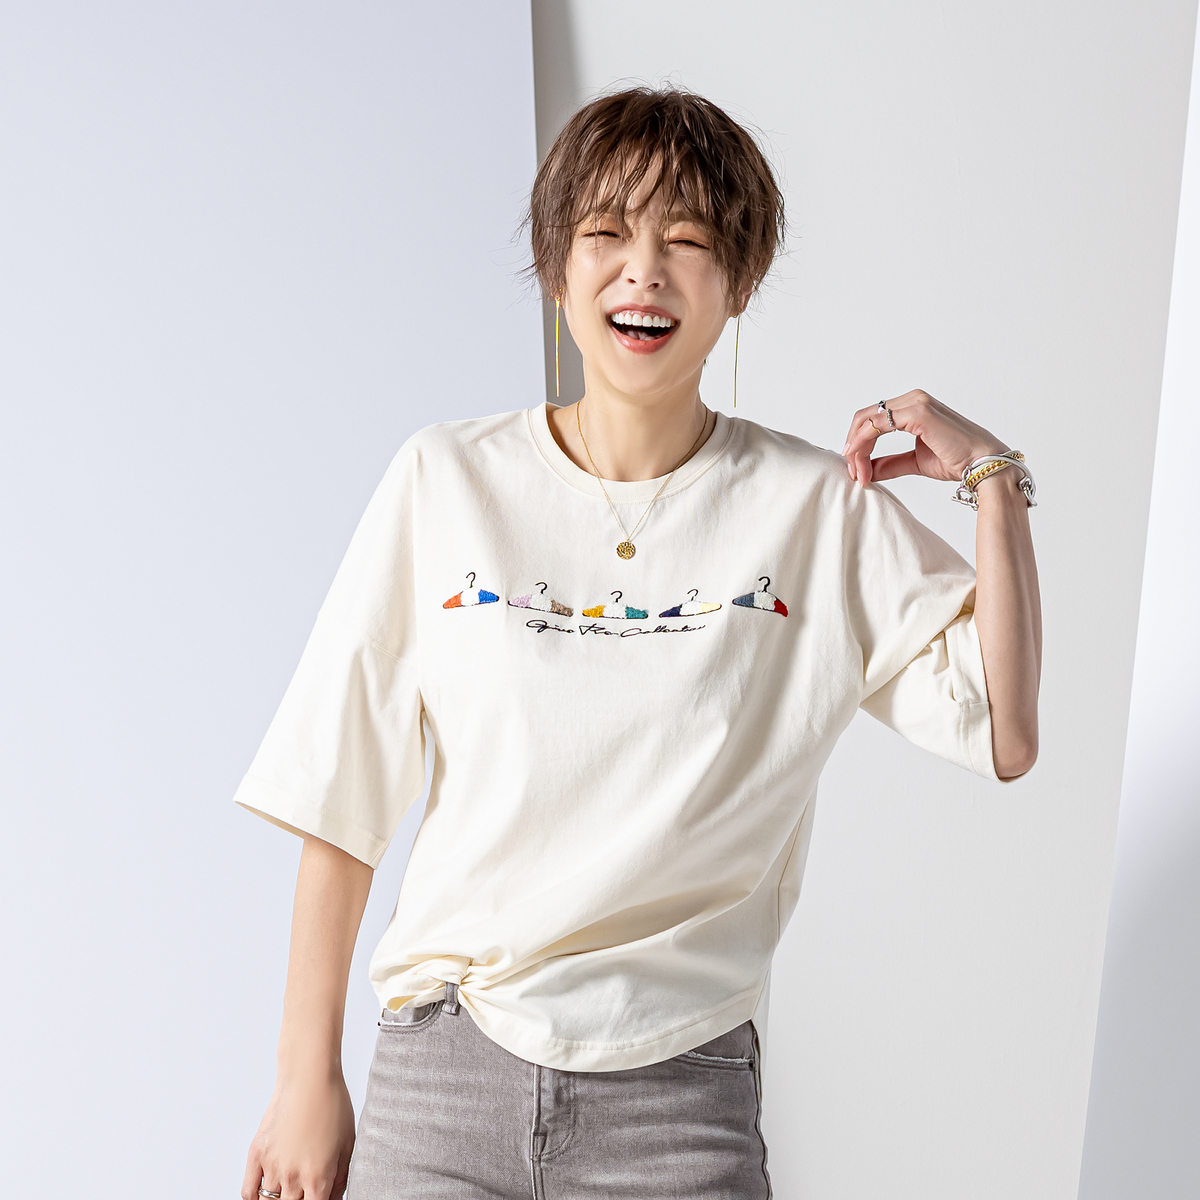 Give Re-Collection ハンガーサガラ刺繍Tシャツ ギブリコレクション（Give Re Collection） - QVC.jp